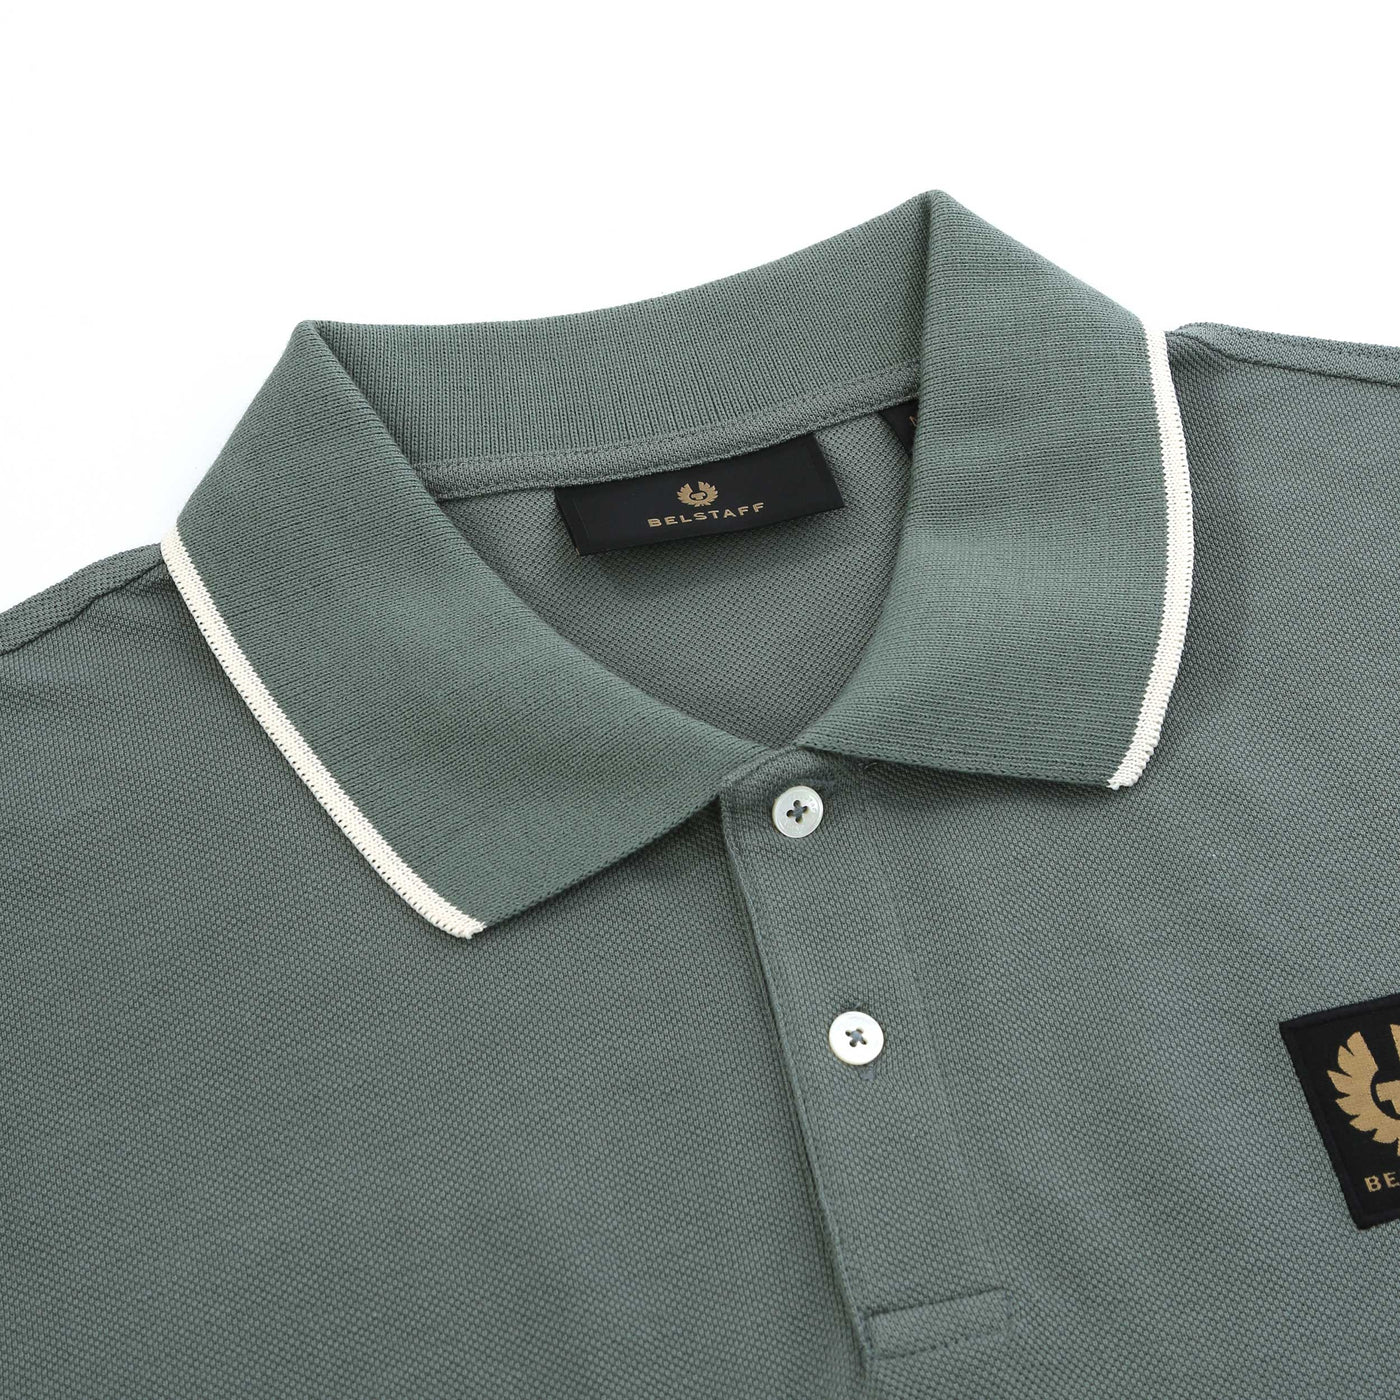 Belstaff Tipped Polo Shirt in Mineral Green Collar